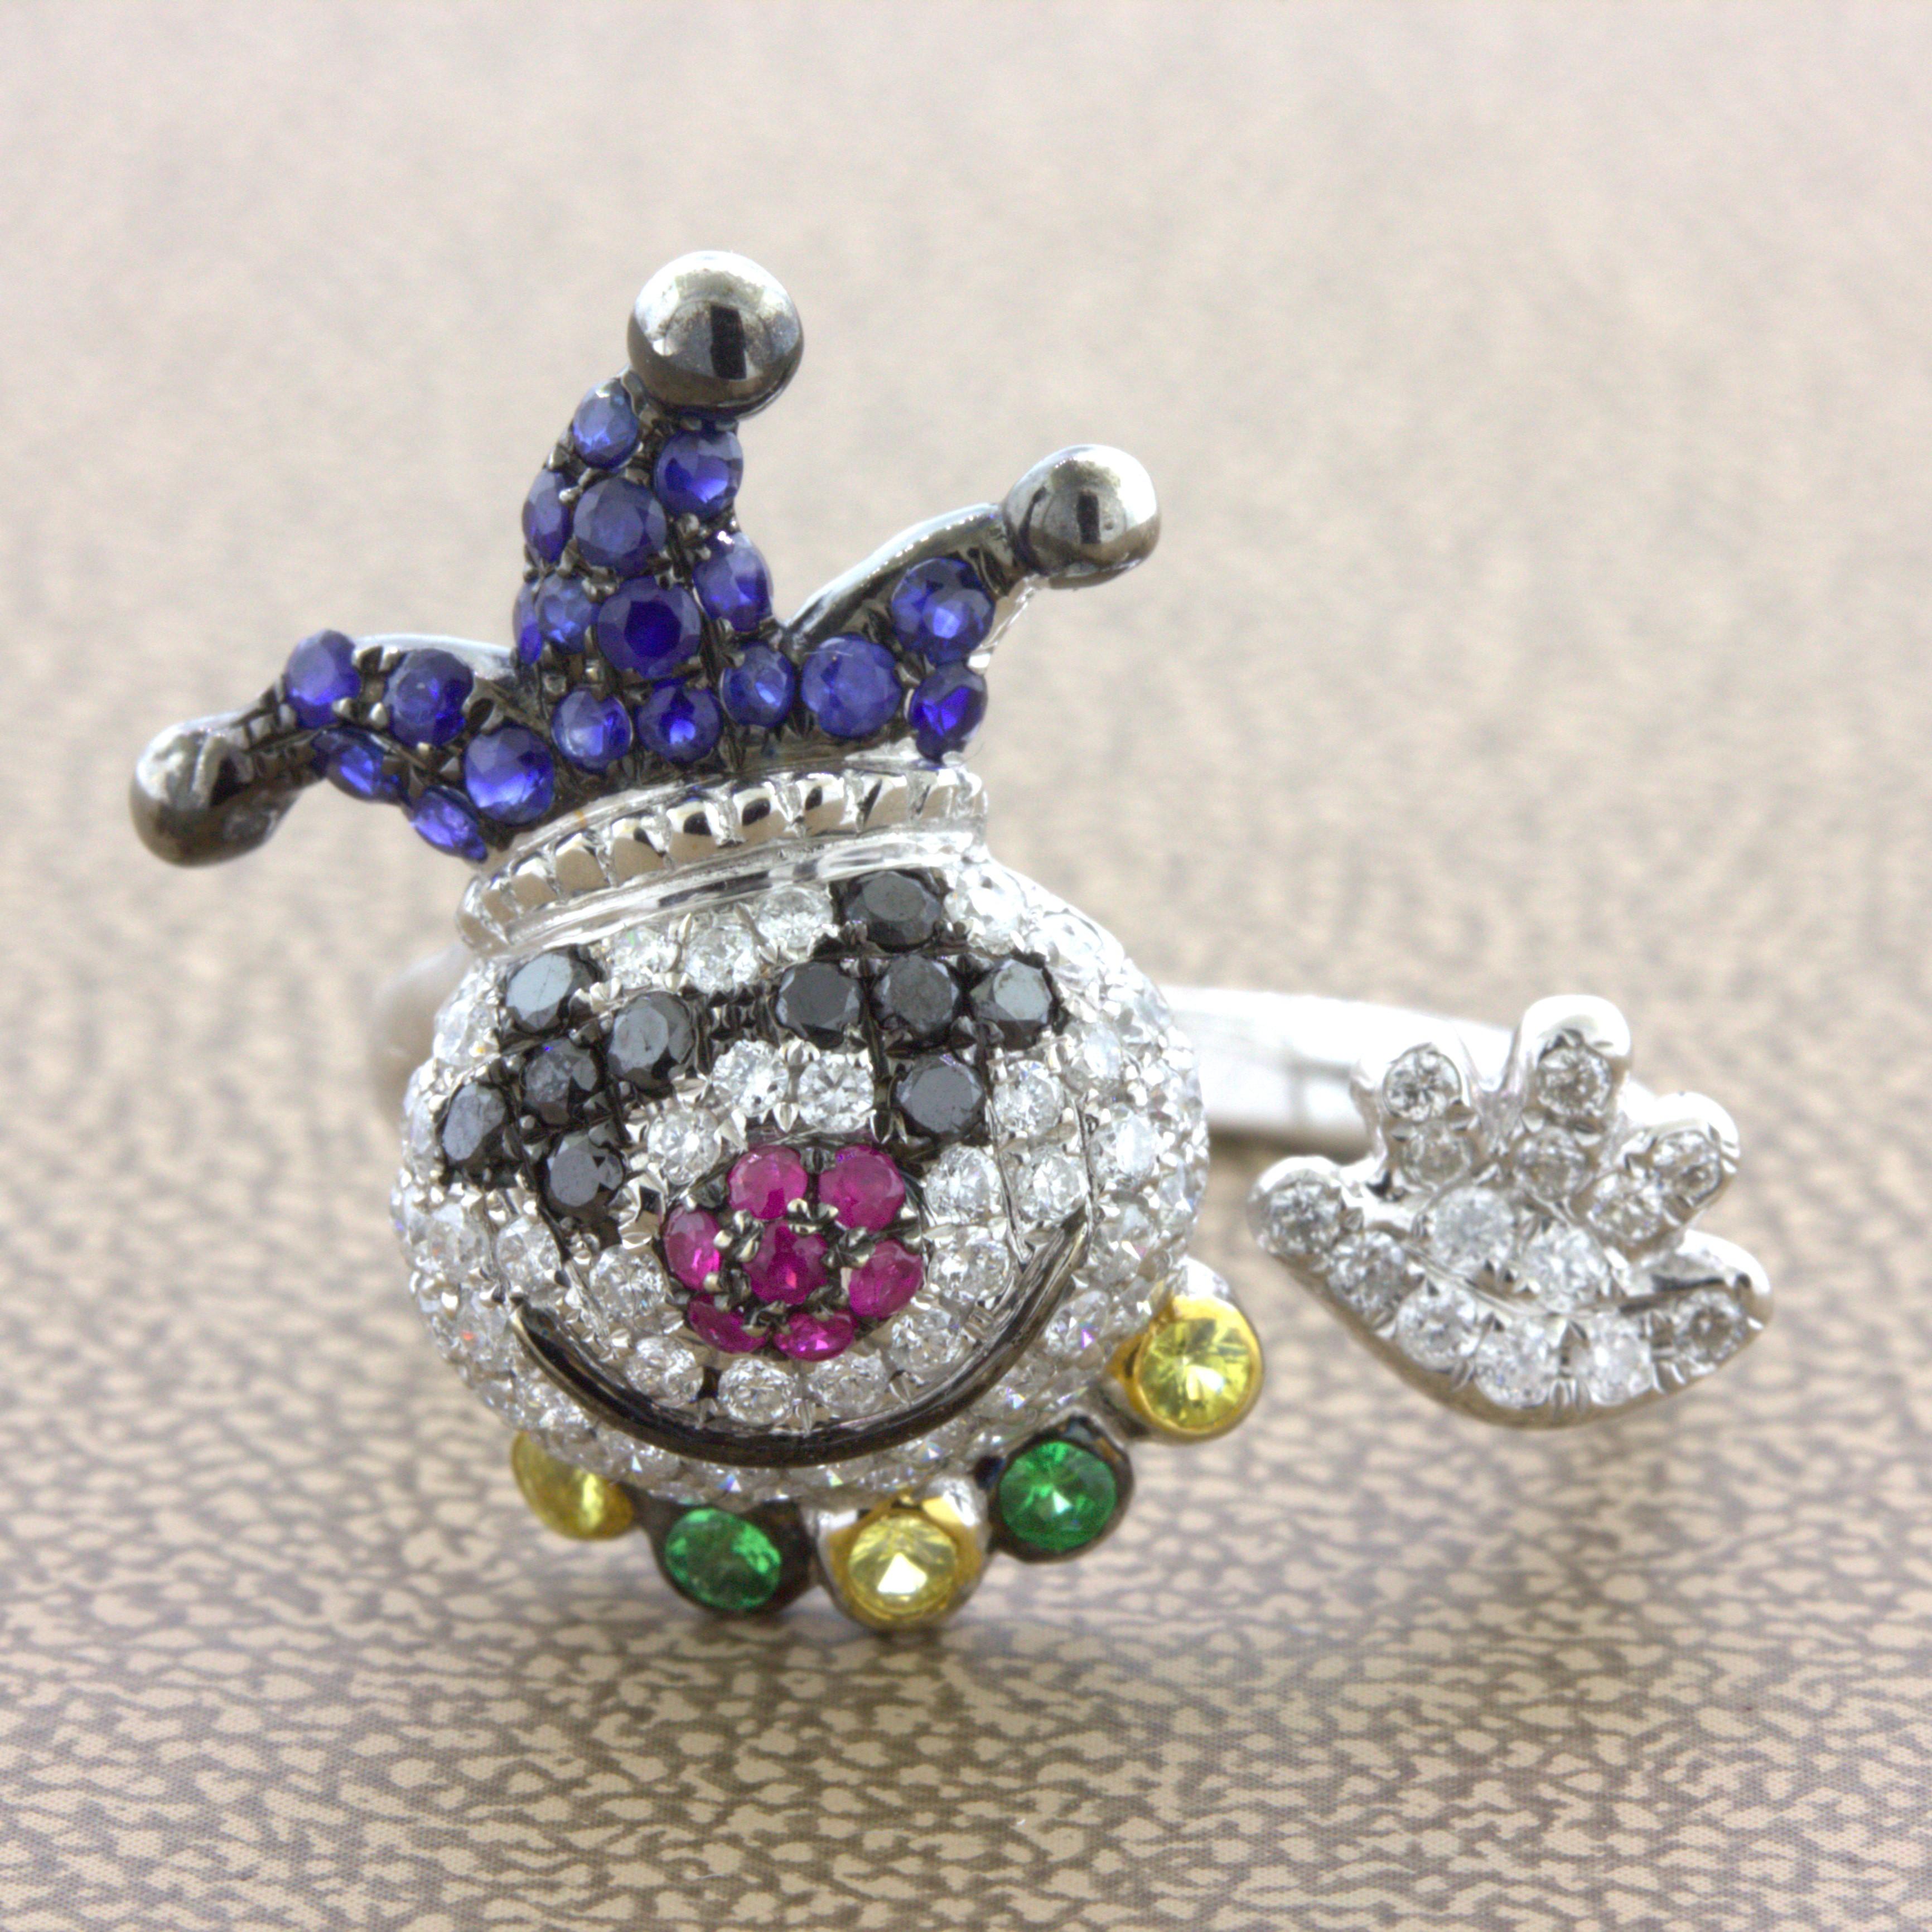 A fun and friendly clown studded in diamonds and colored gemstones. The smiling clown features 0.90 carats of white and black diamonds making its face, eyes, and hand along with 0.48 carats of rubies and sapphires which make its hat and nose. It has